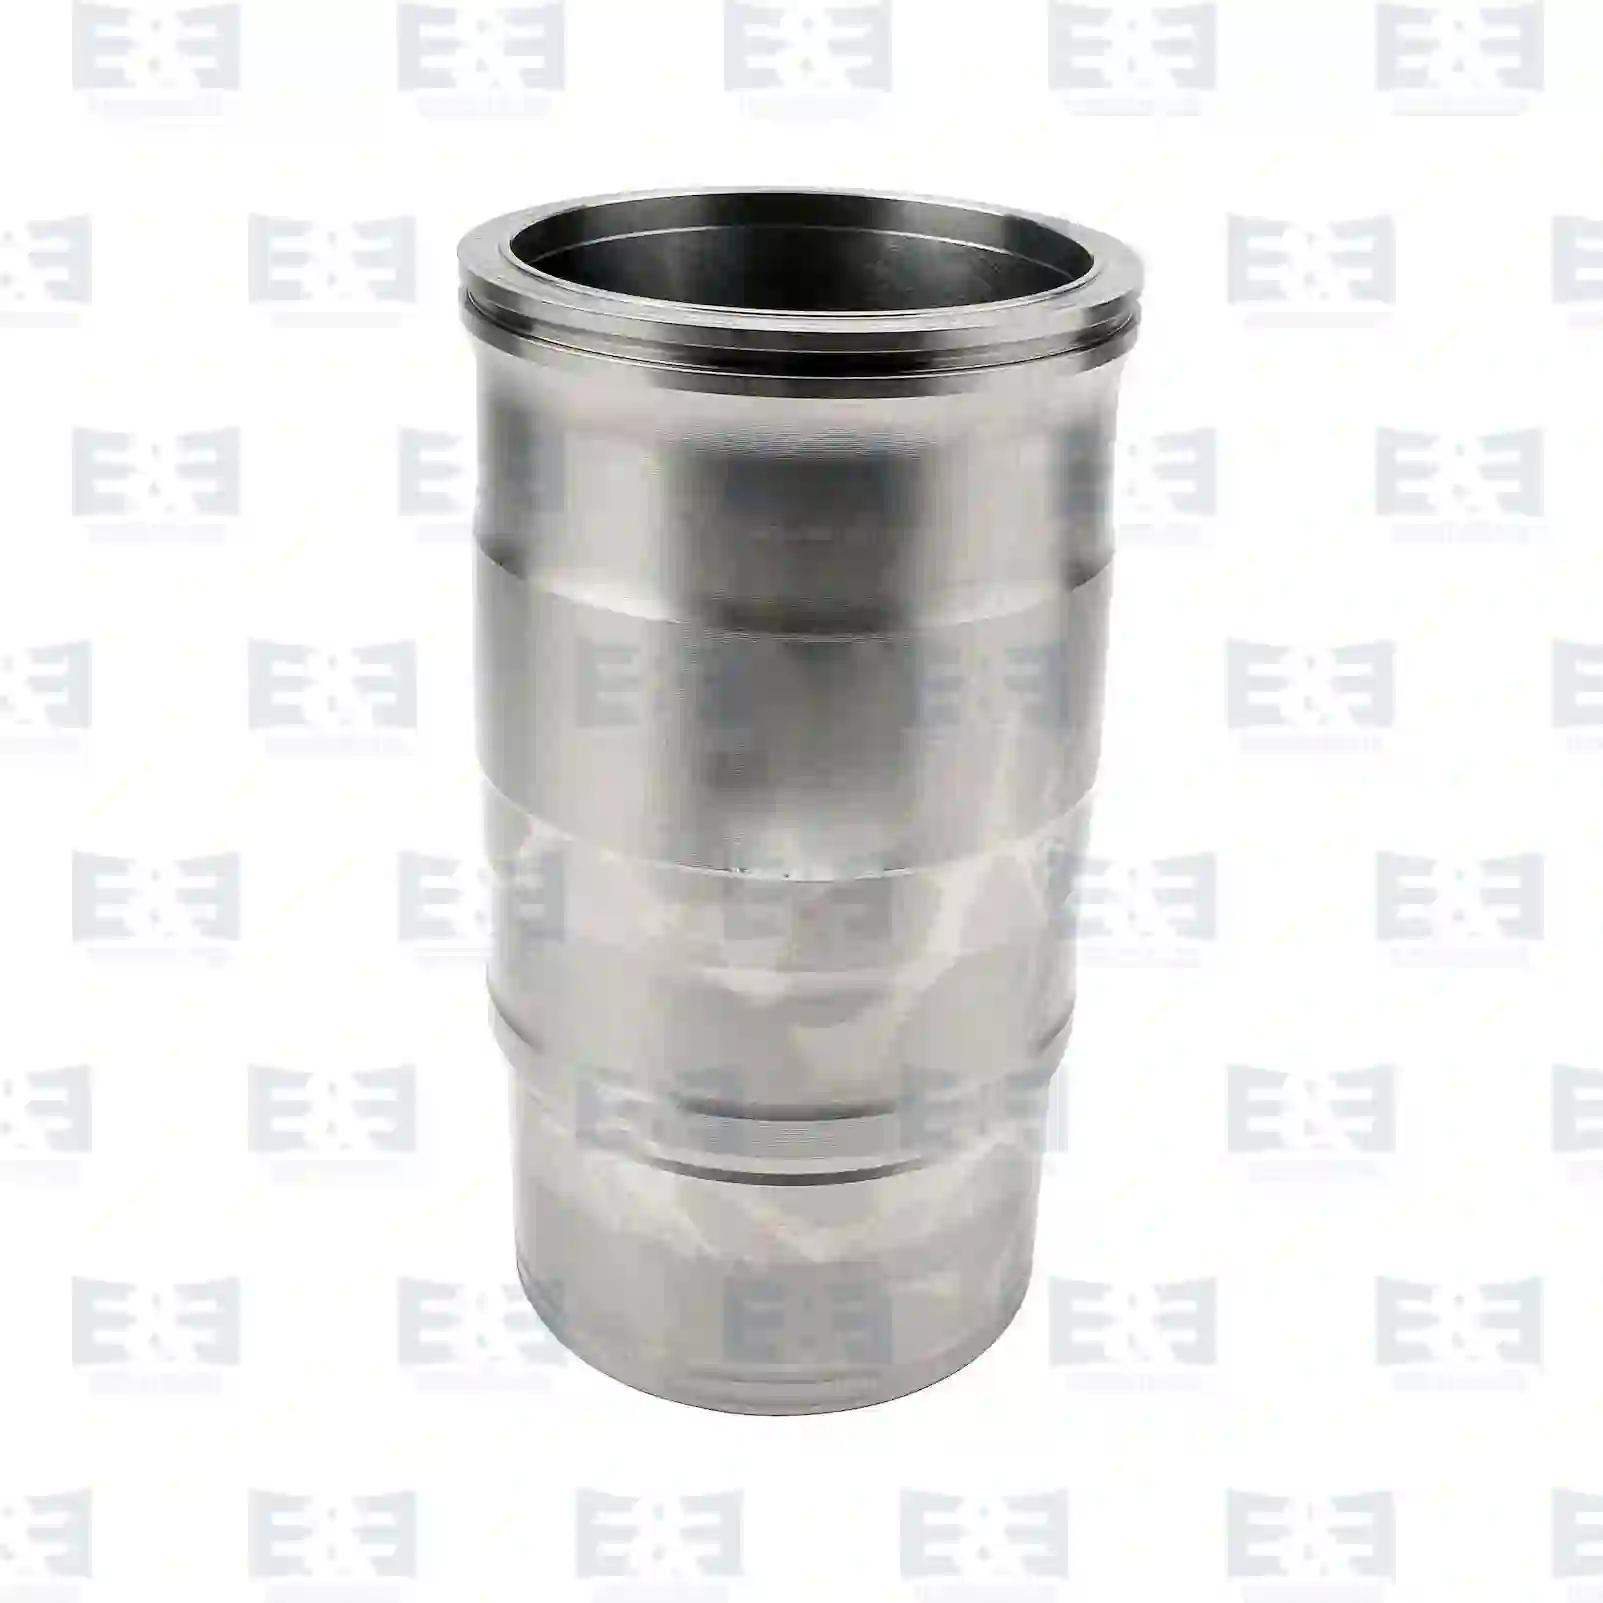 Cylinder liner, without seal rings, 2E2208381, 1786085, 1789623, 1868159, 1917101 ||  2E2208381 E&E Truck Spare Parts | Truck Spare Parts, Auotomotive Spare Parts Cylinder liner, without seal rings, 2E2208381, 1786085, 1789623, 1868159, 1917101 ||  2E2208381 E&E Truck Spare Parts | Truck Spare Parts, Auotomotive Spare Parts